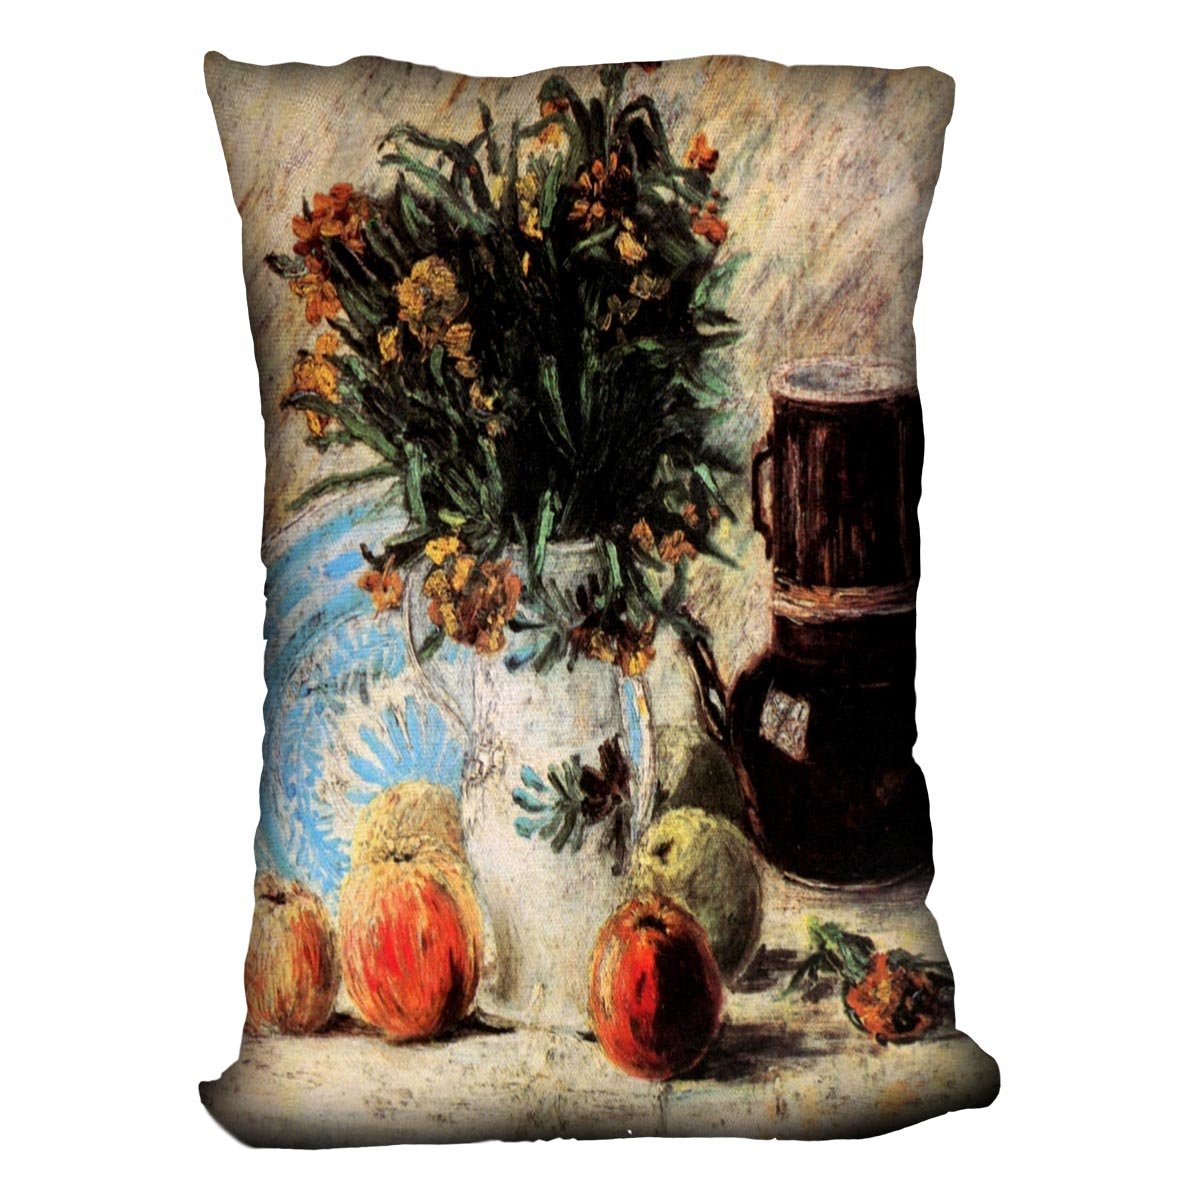 Vase with Flowers Coffeepot and Fruit by Van Gogh Throw Pillow